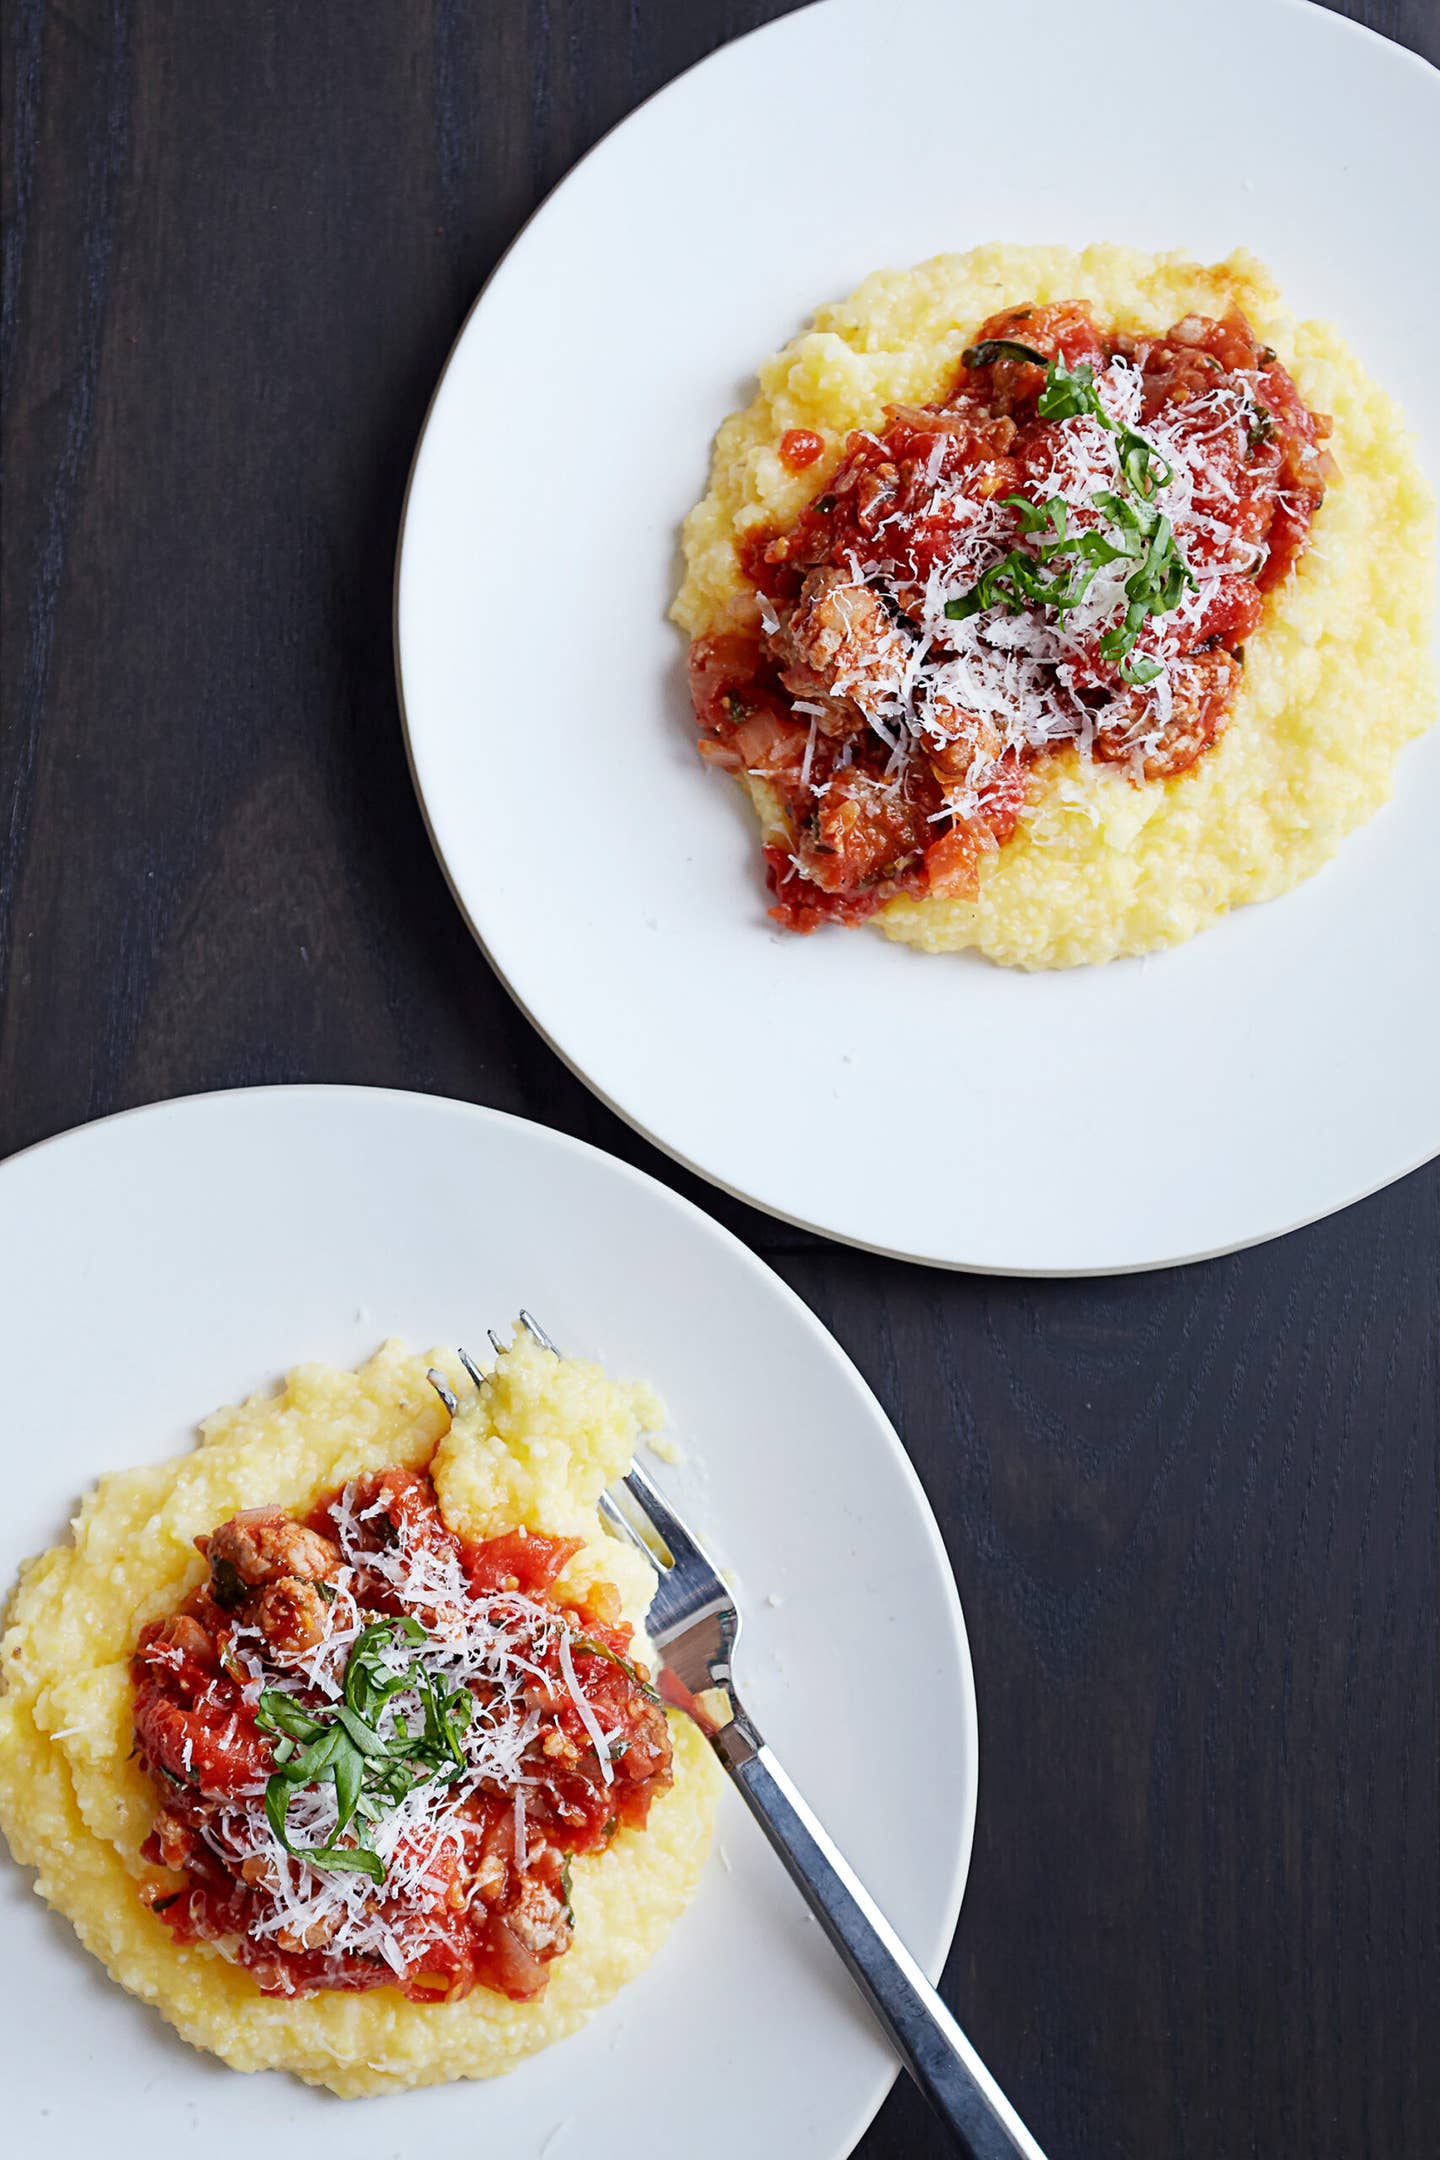 11 Dishes All About the Parmesan